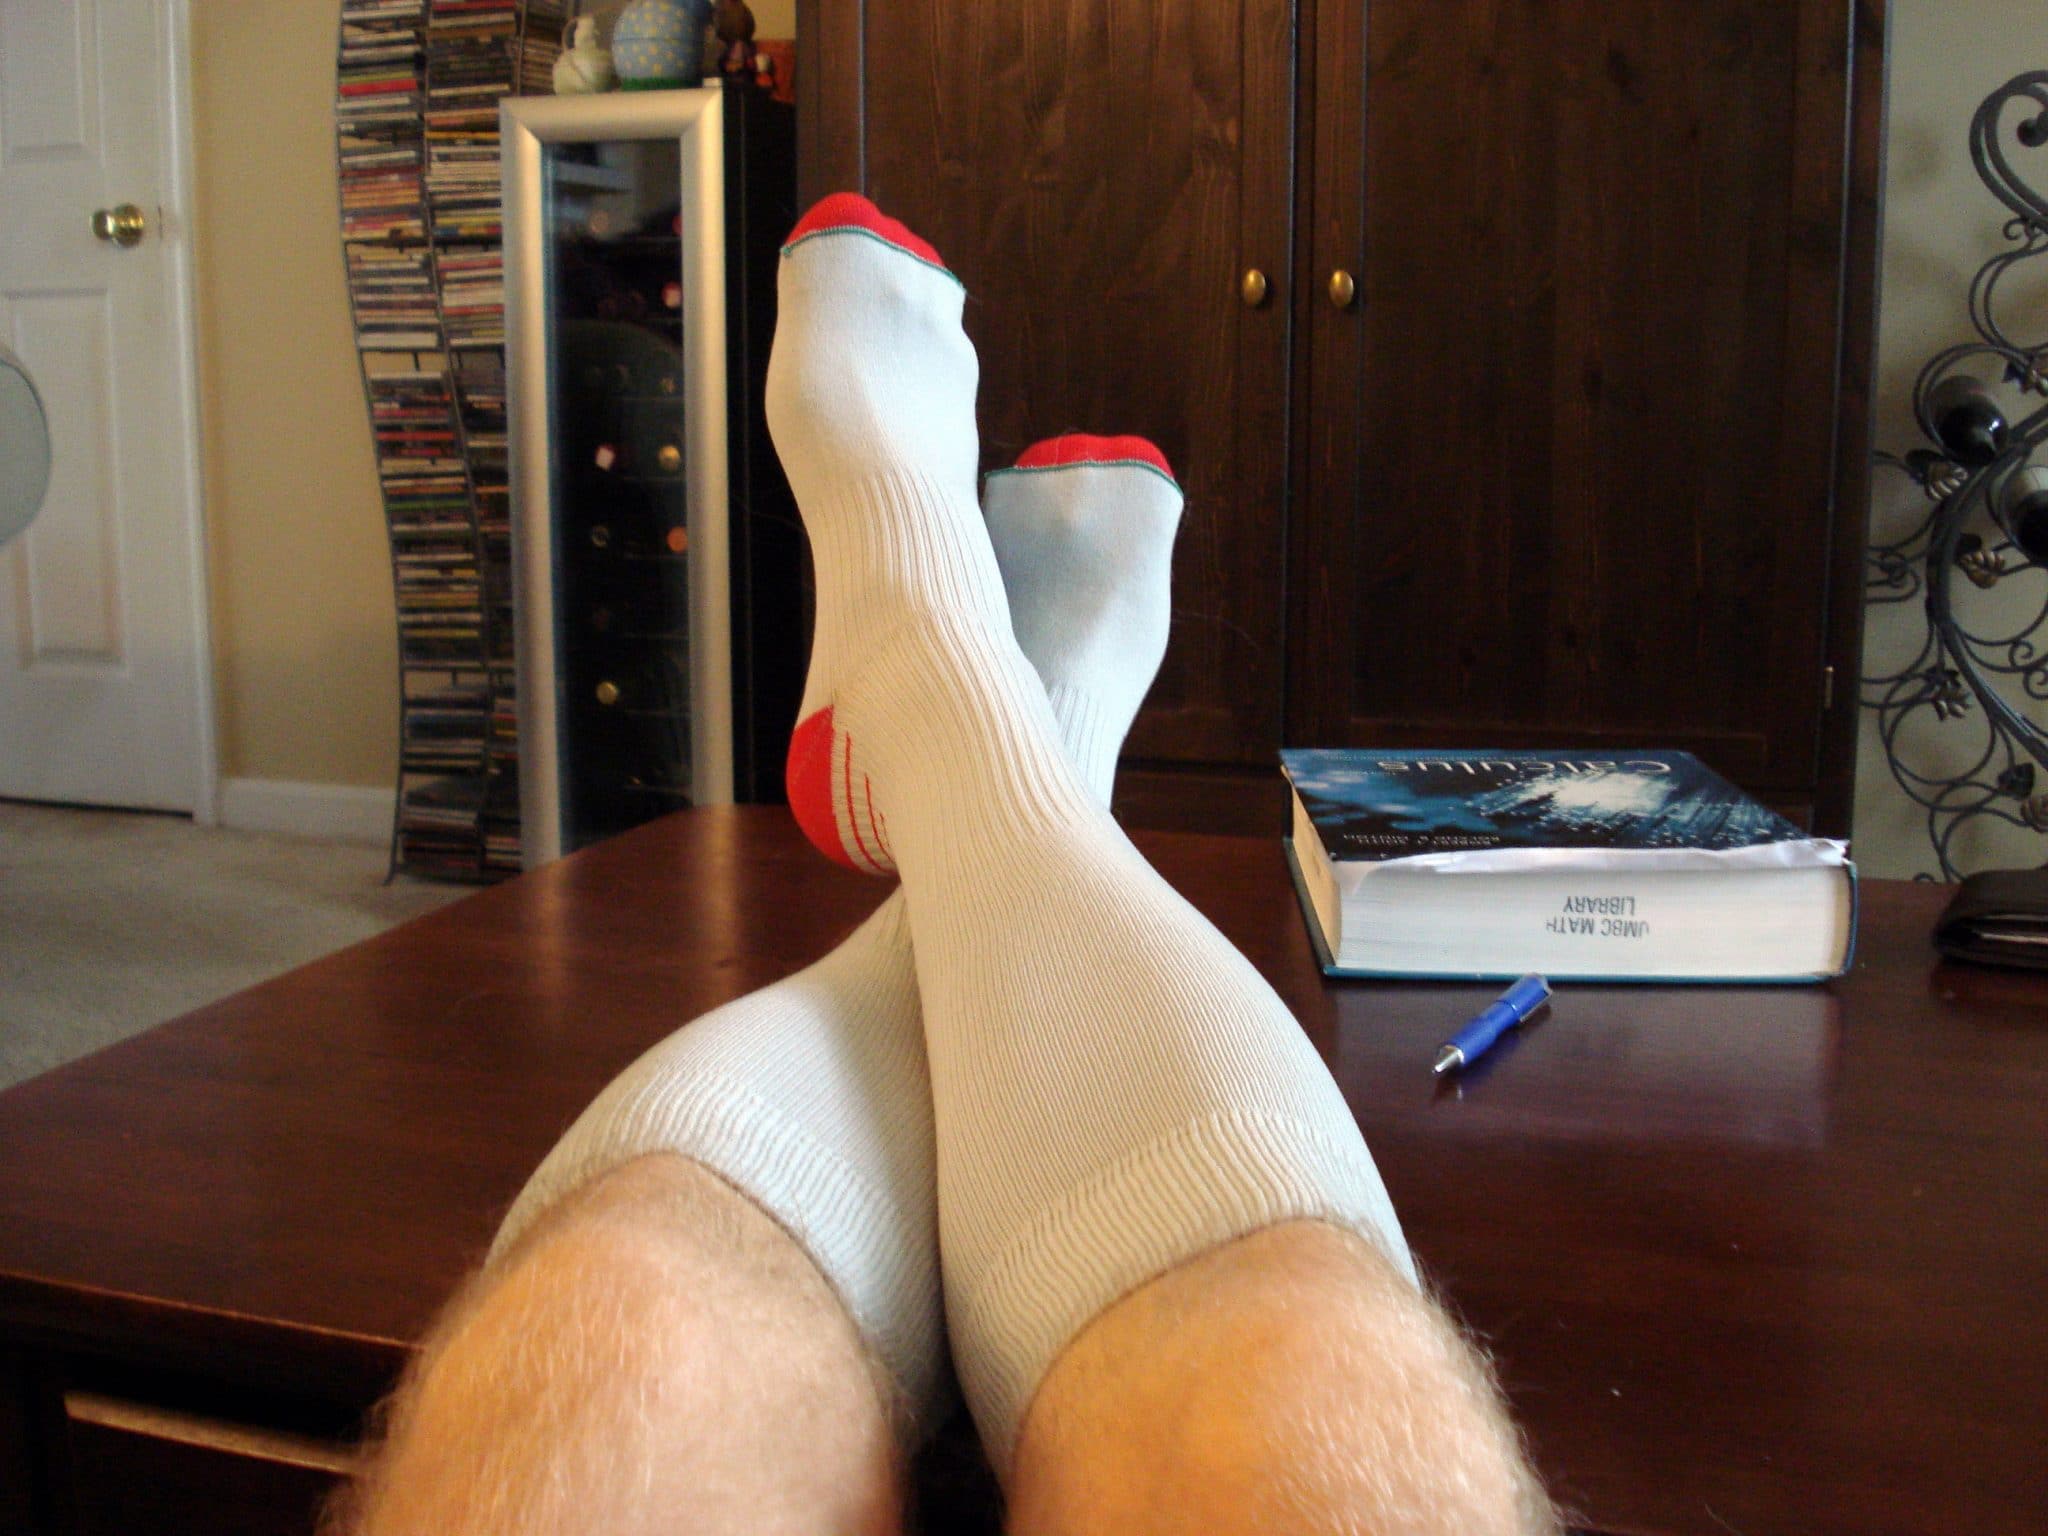 Legs propped up on coffee table wearing white compression socks with red toes